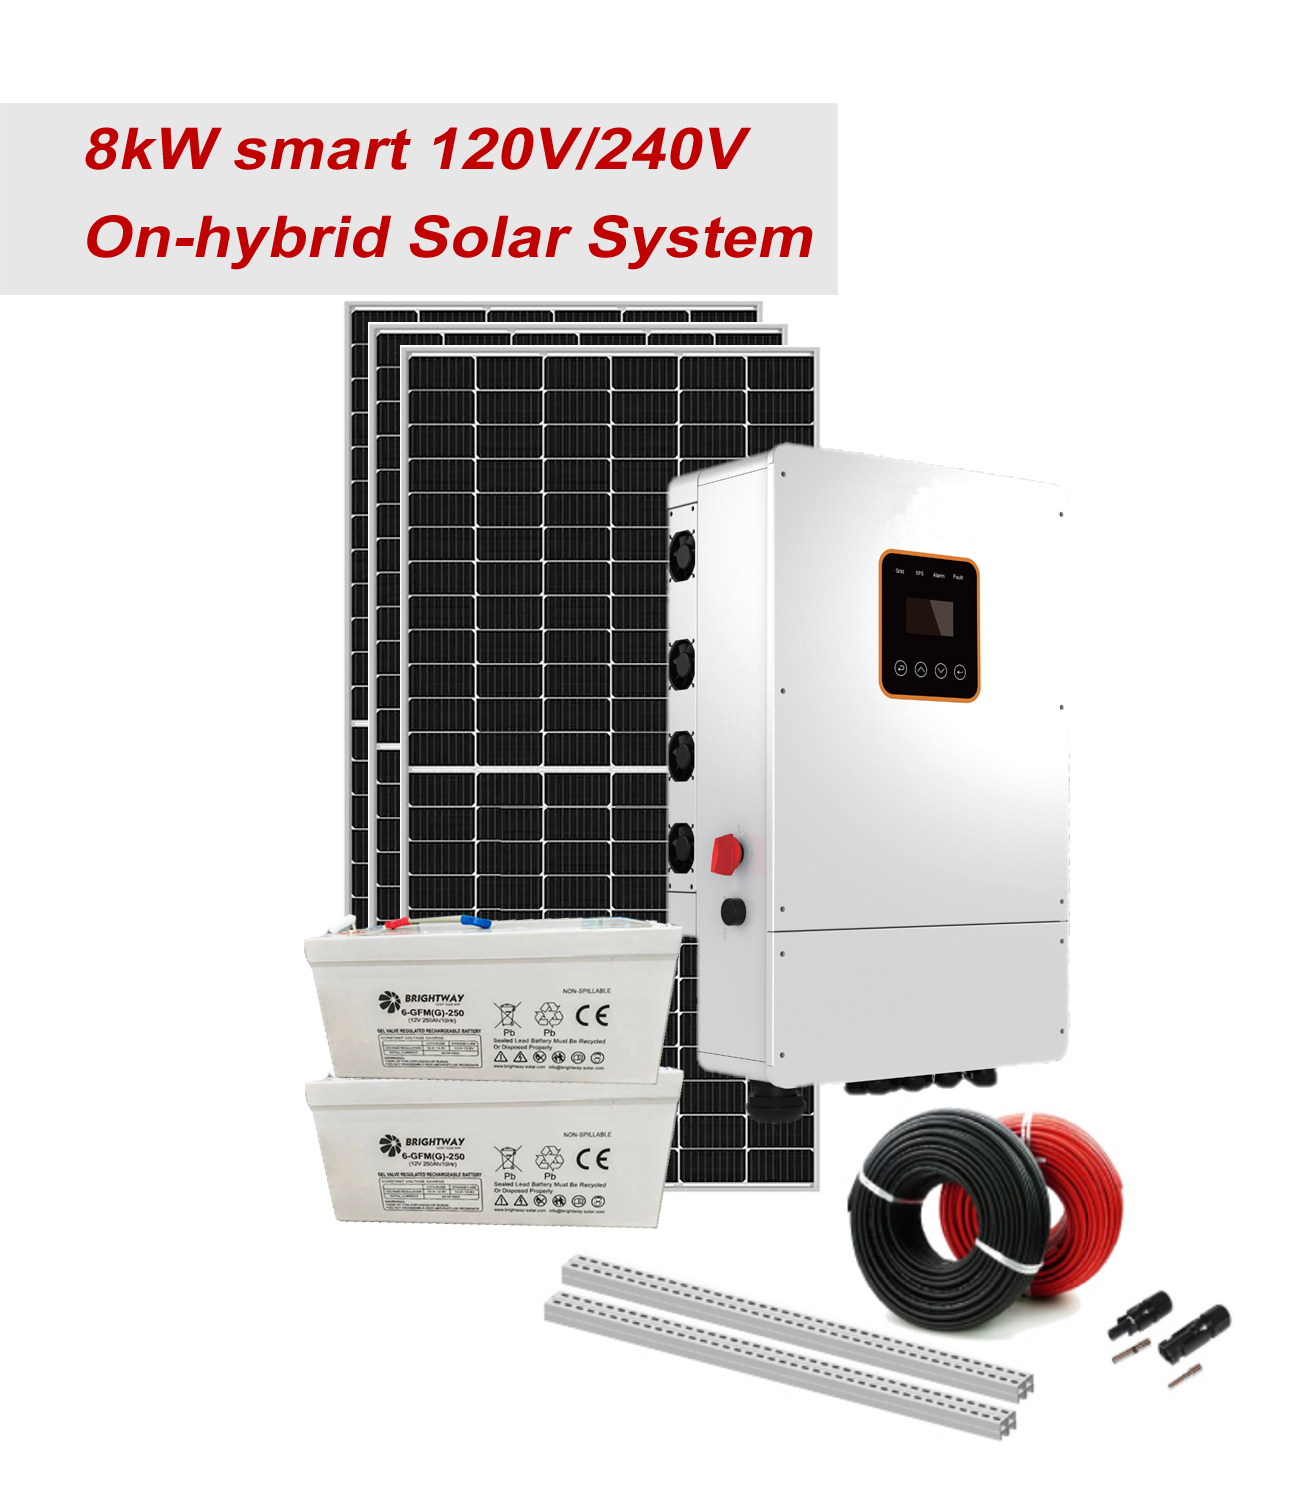 Solar on Hybrid System for Home Or Farm Use 8kW 24kWh battery storage 500W solar panel